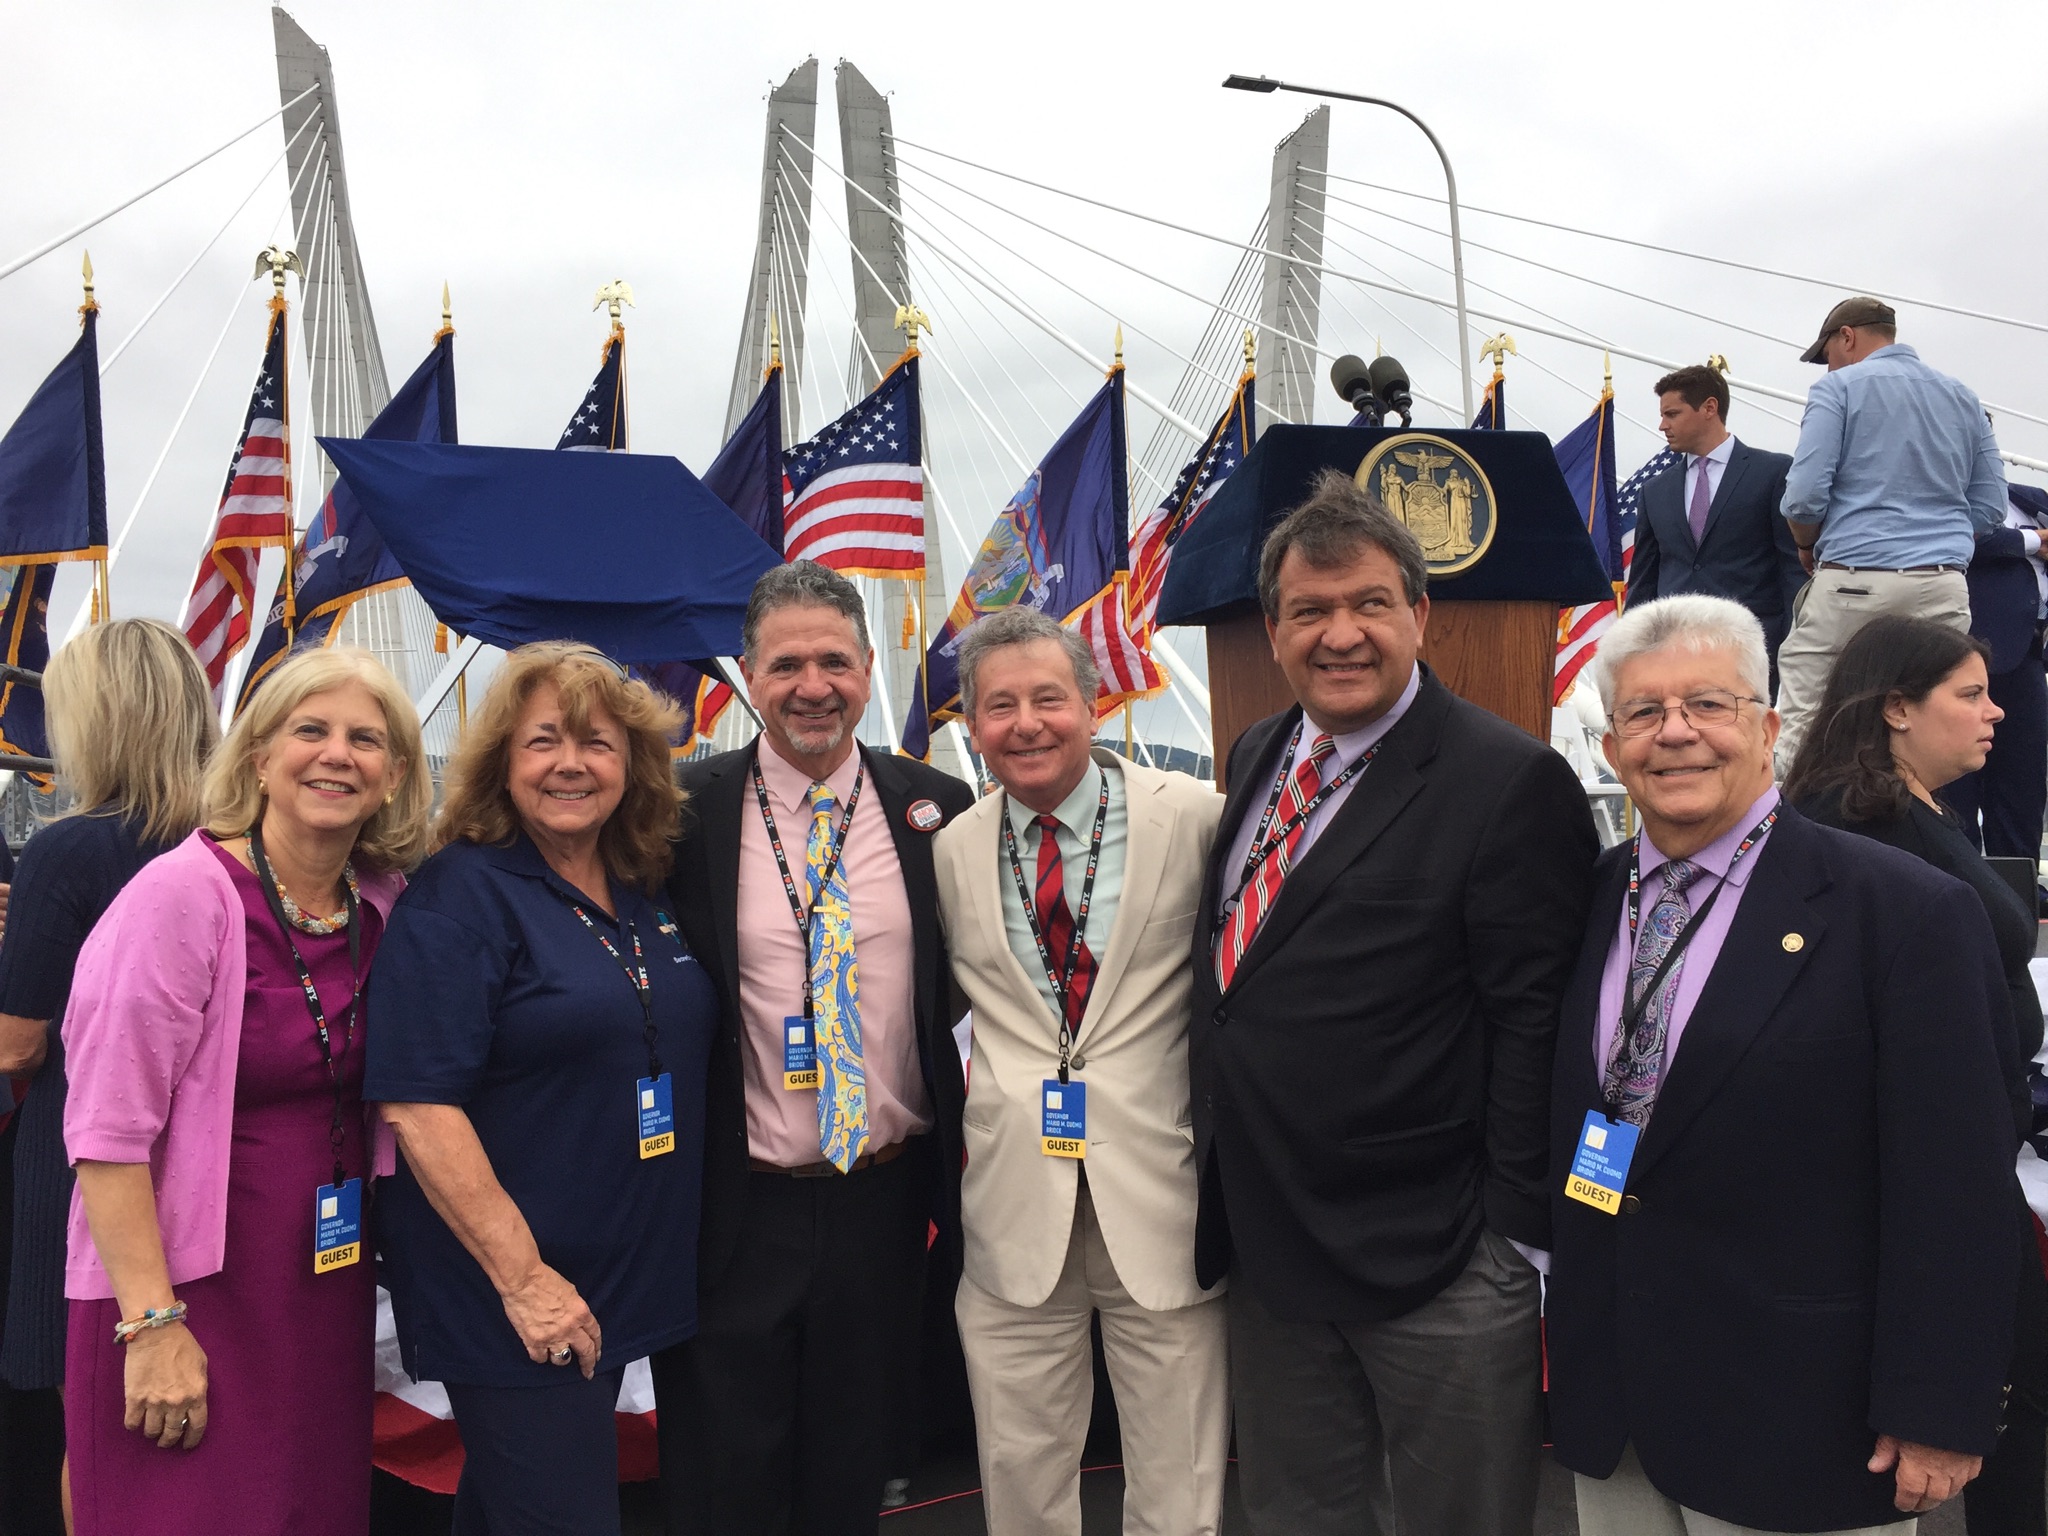 Assemblyman Steve Otis at the Opening Ceremony of the 2nd span of the Mario M. Cuomo Bridge